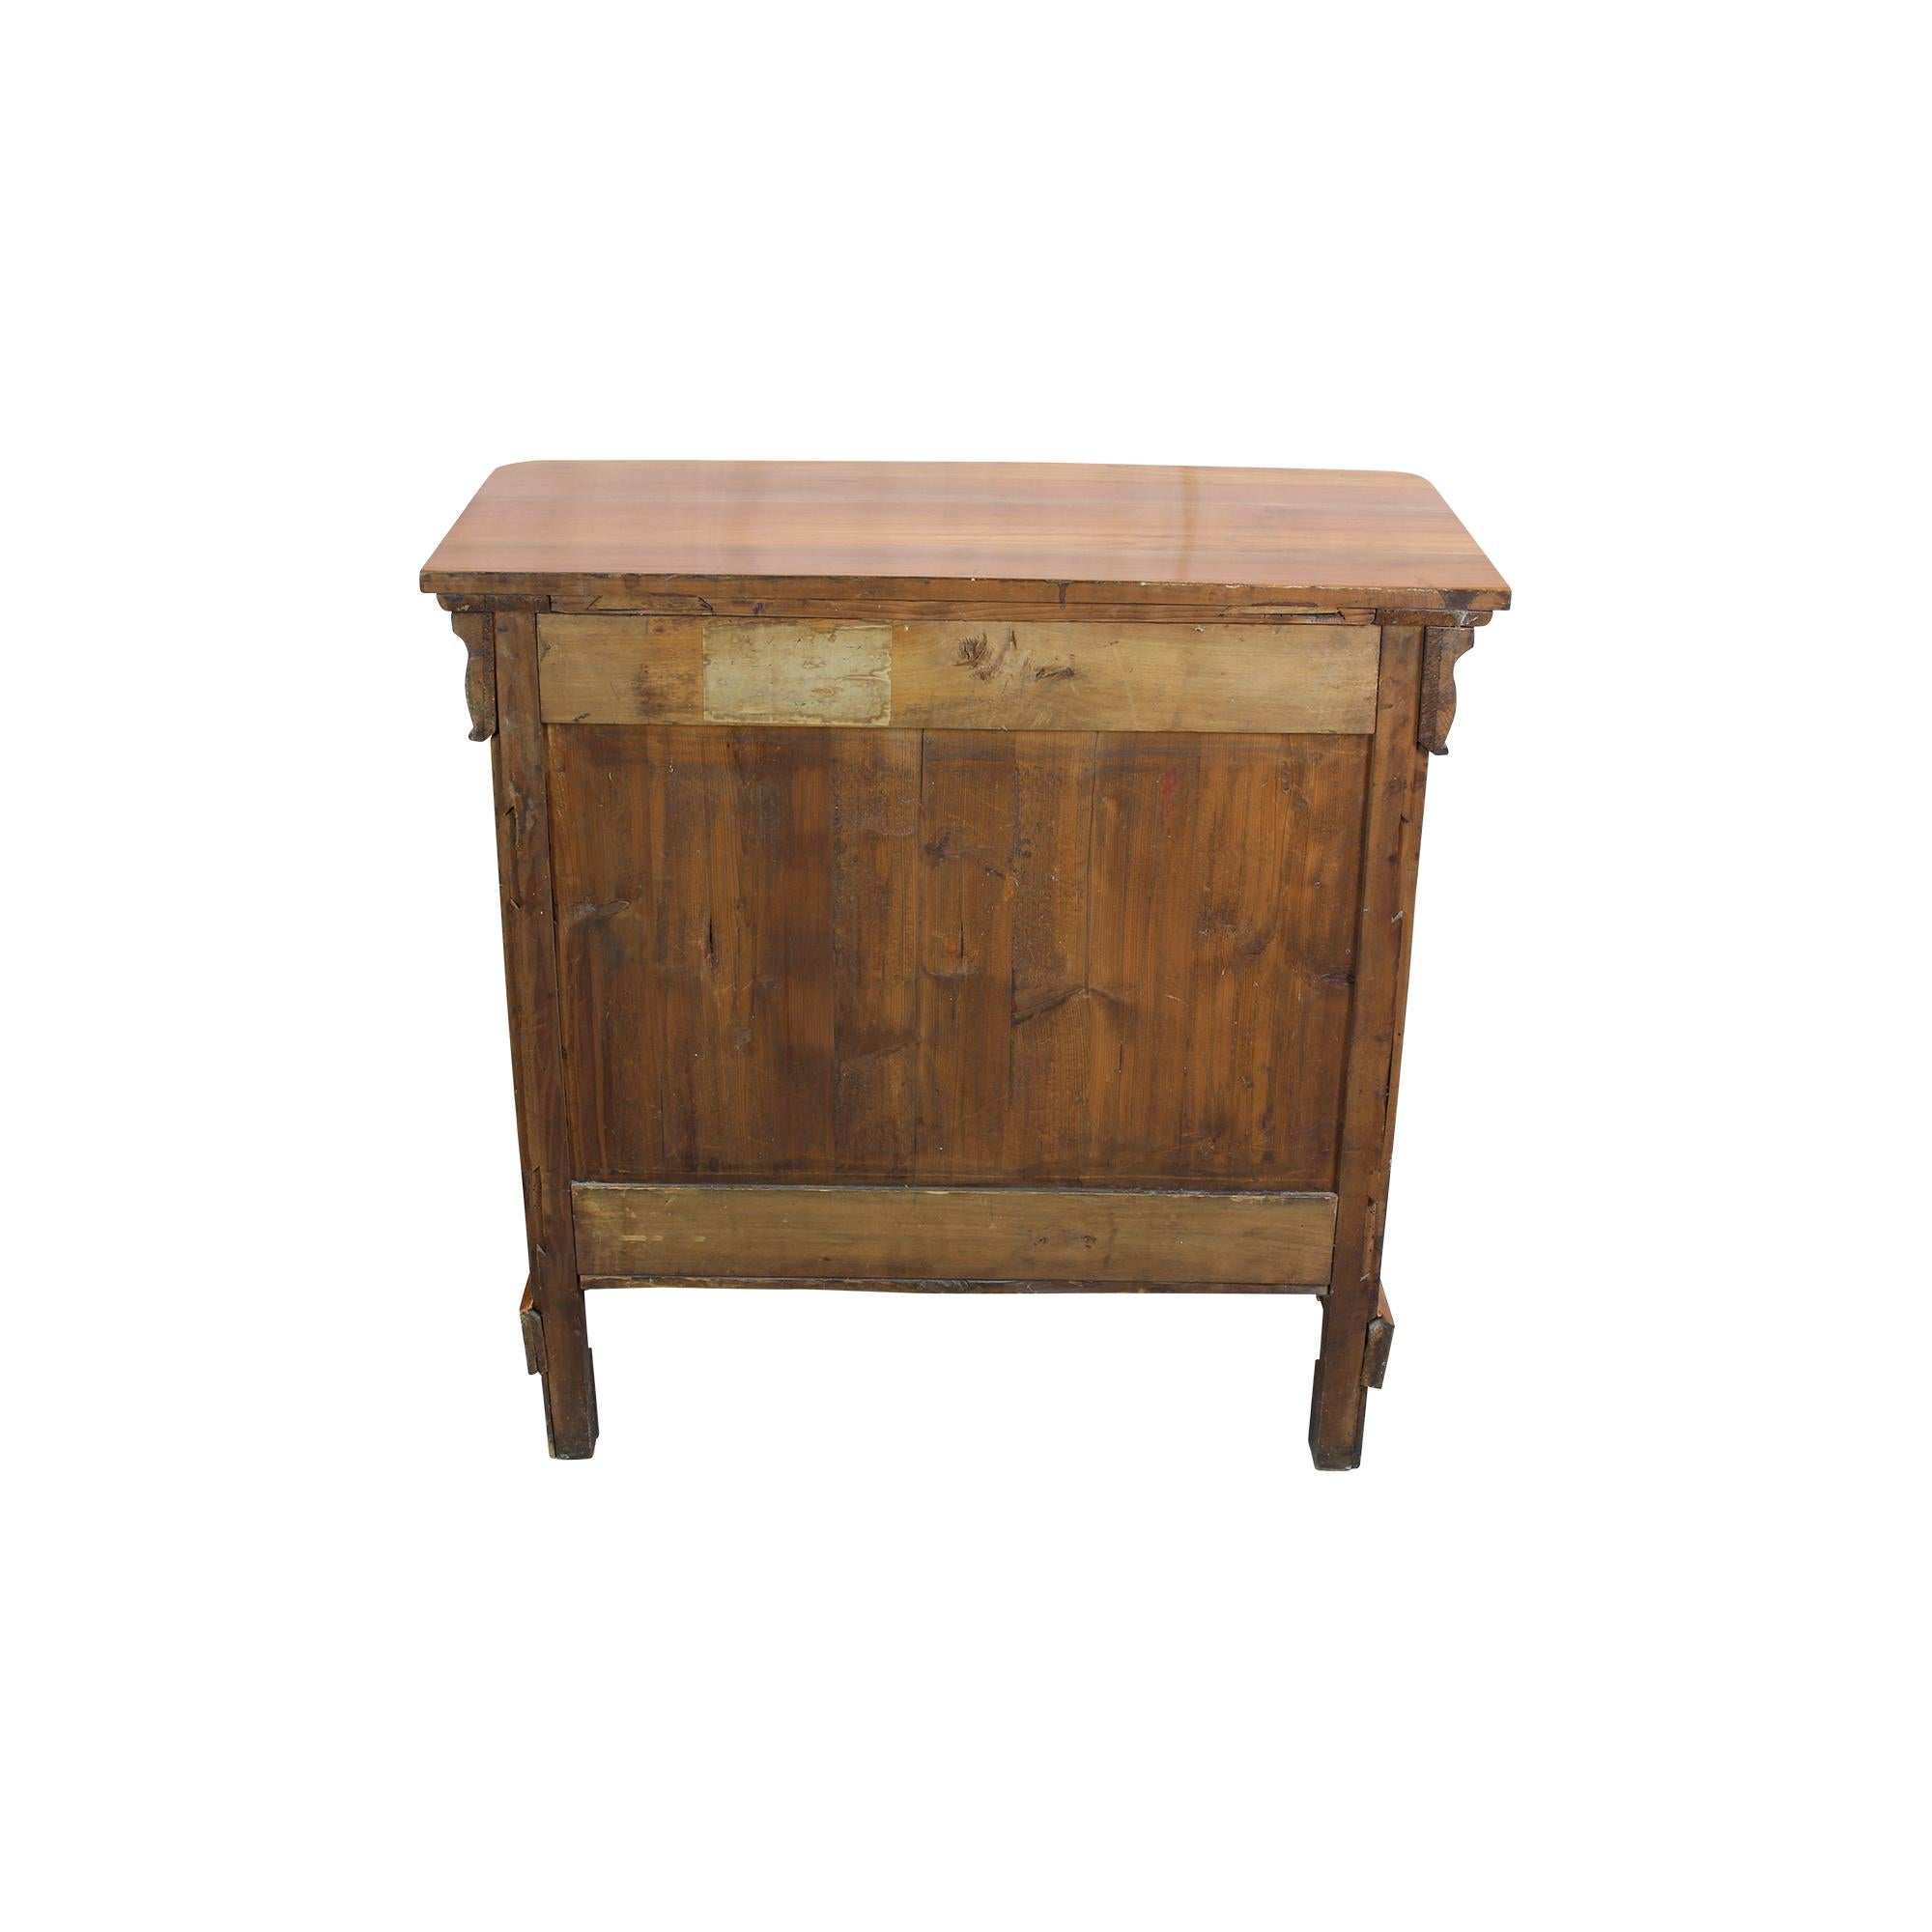 Early 19th Century Biedermeier Cherrywood Half Cabinet / Commode For Sale 4